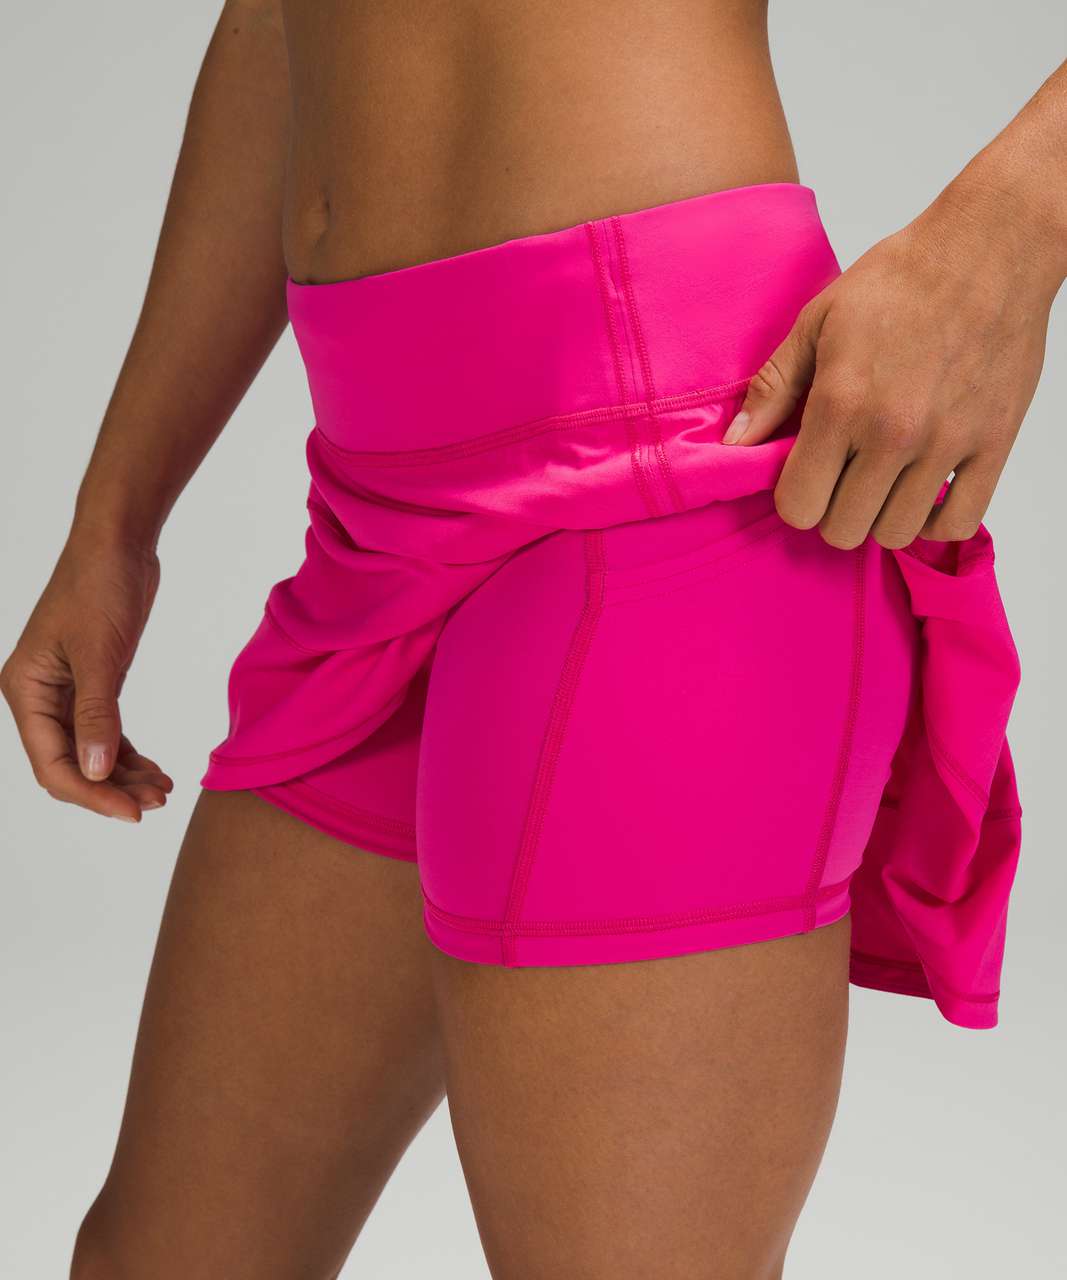 Lululemon Pace Rival Mid Rise Skirt *Tall - Sonic Pink